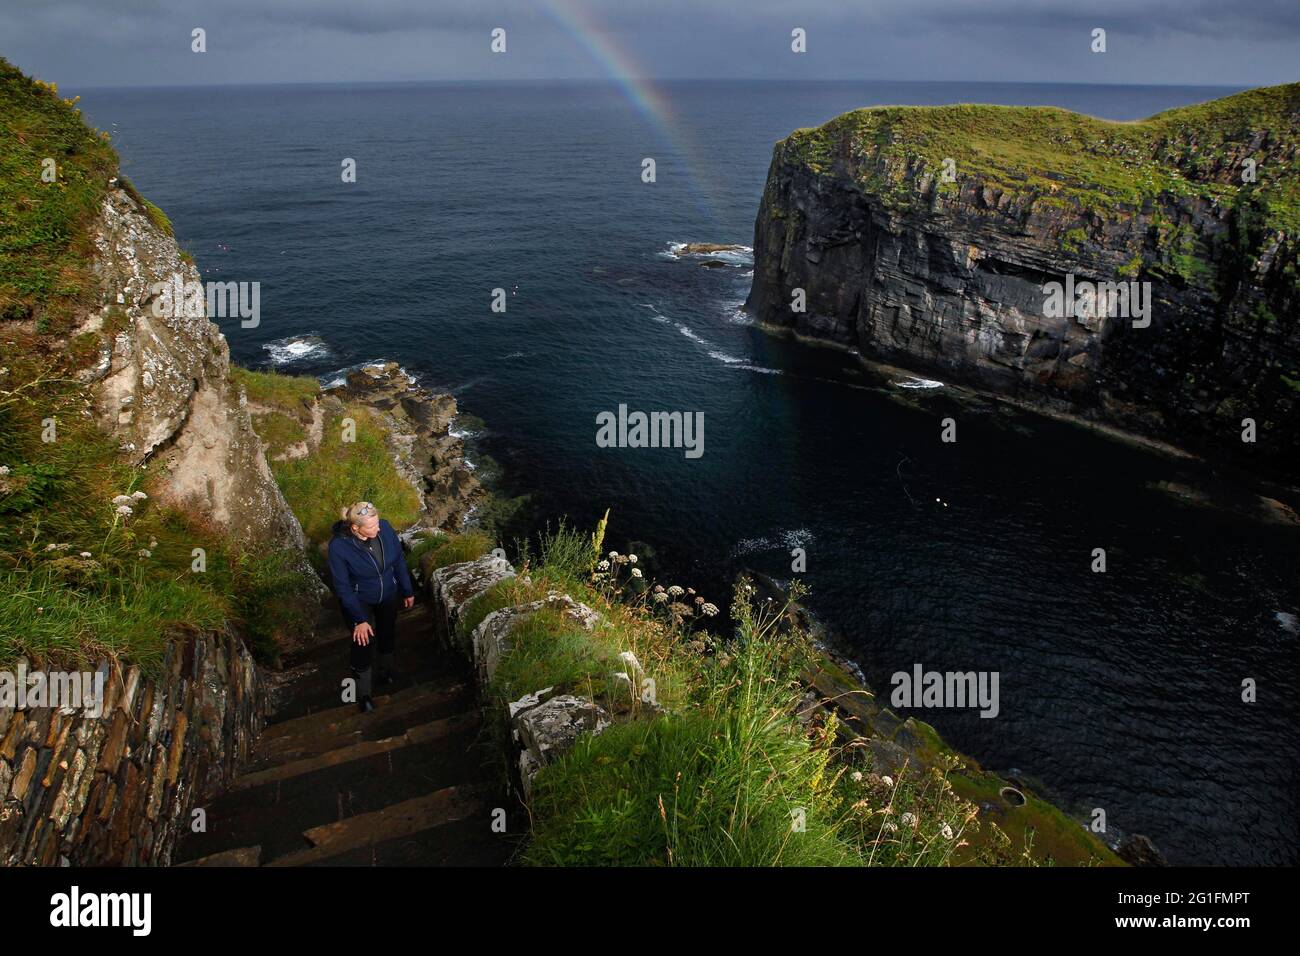 Steps, Stairs, Cliff, Rocky coast, Woman, Whaligoe Steps, Wick, North east coast, Highlands, Highland, Scotland, Great Britain Stock Photo